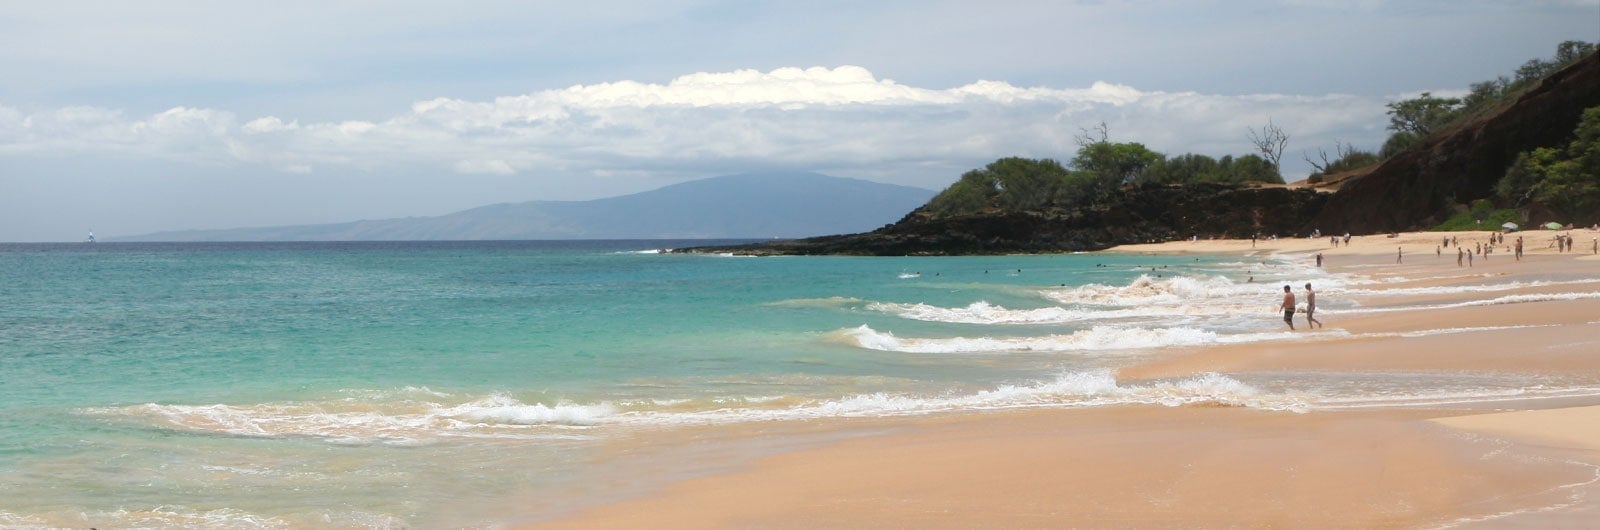 27 Things to Do on Maui